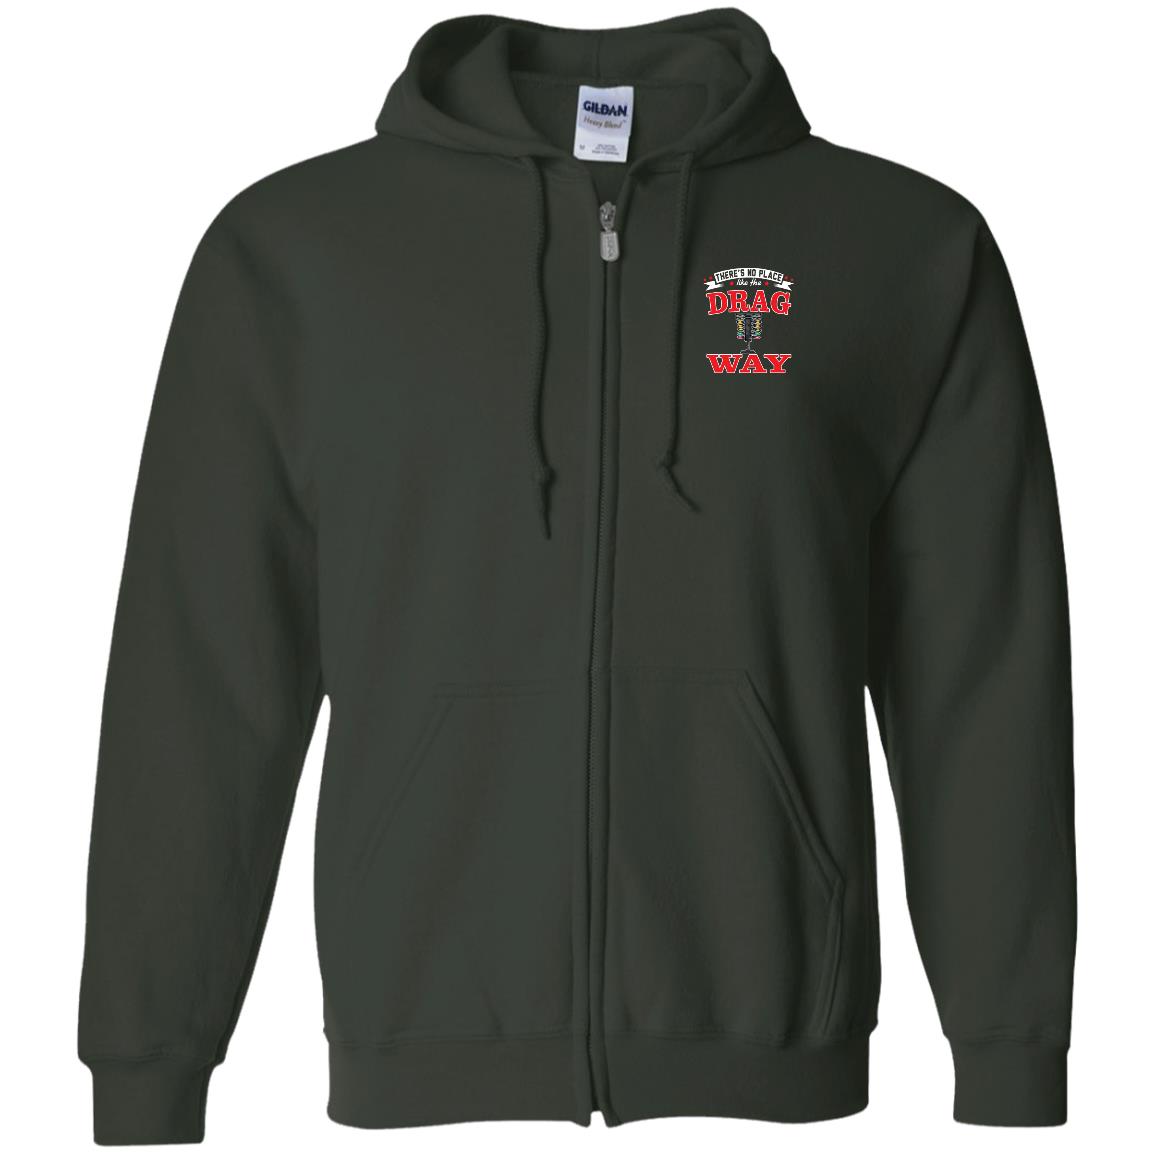 There's No Place Like The Dragway Zip Up Hooded Sweatshirt